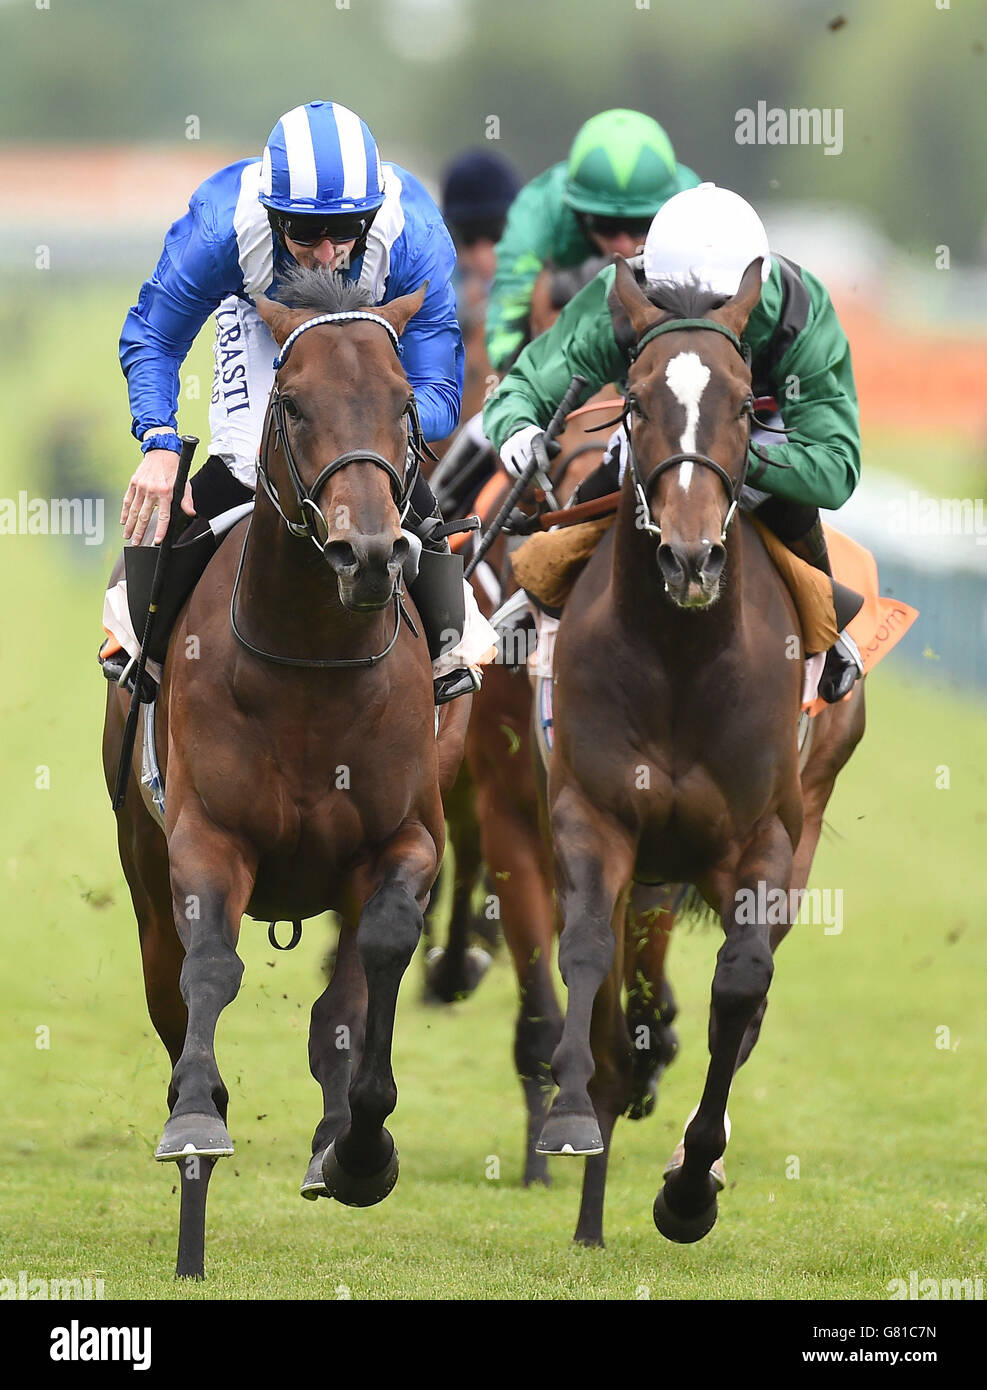 Horse Racing - Timeform Jury/Sandy Lane Stakes Day - Haydock Park. Adaay (left) ridden by Paul Hanagan wins the 888sport Sandy Lane Stakes at Haydock Park Racecourse, Newton-le-Willows. Stock Photo